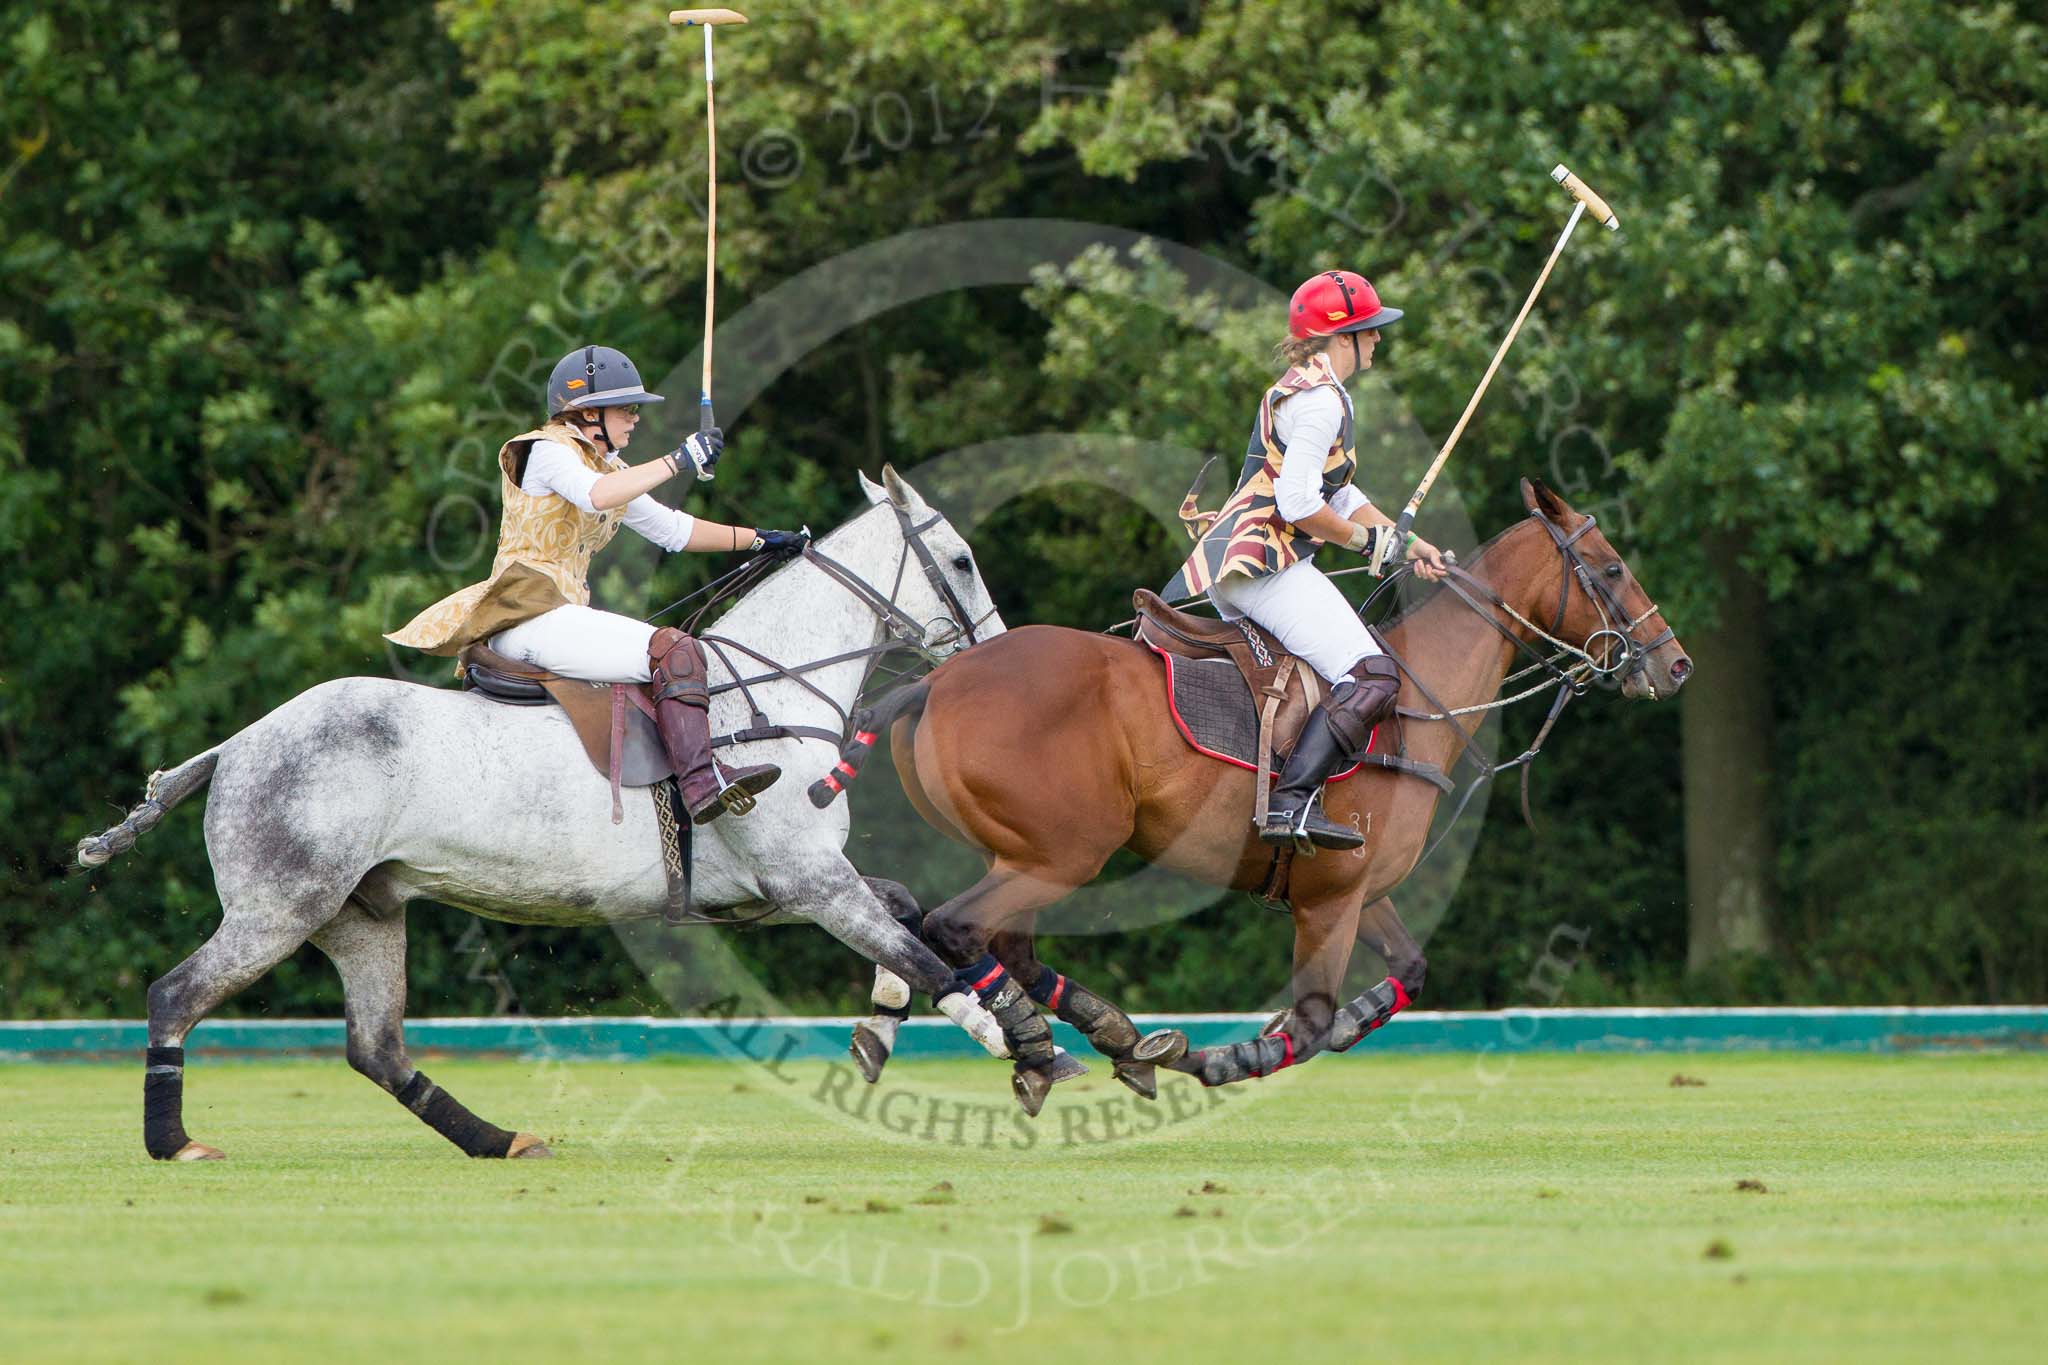 7th Heritage Polo Cup finals: Emma Boers & Sarah Wisman..
Hurtwood Park Polo Club,
Ewhurst Green,
Surrey,
United Kingdom,
on 05 August 2012 at 15:16, image #141